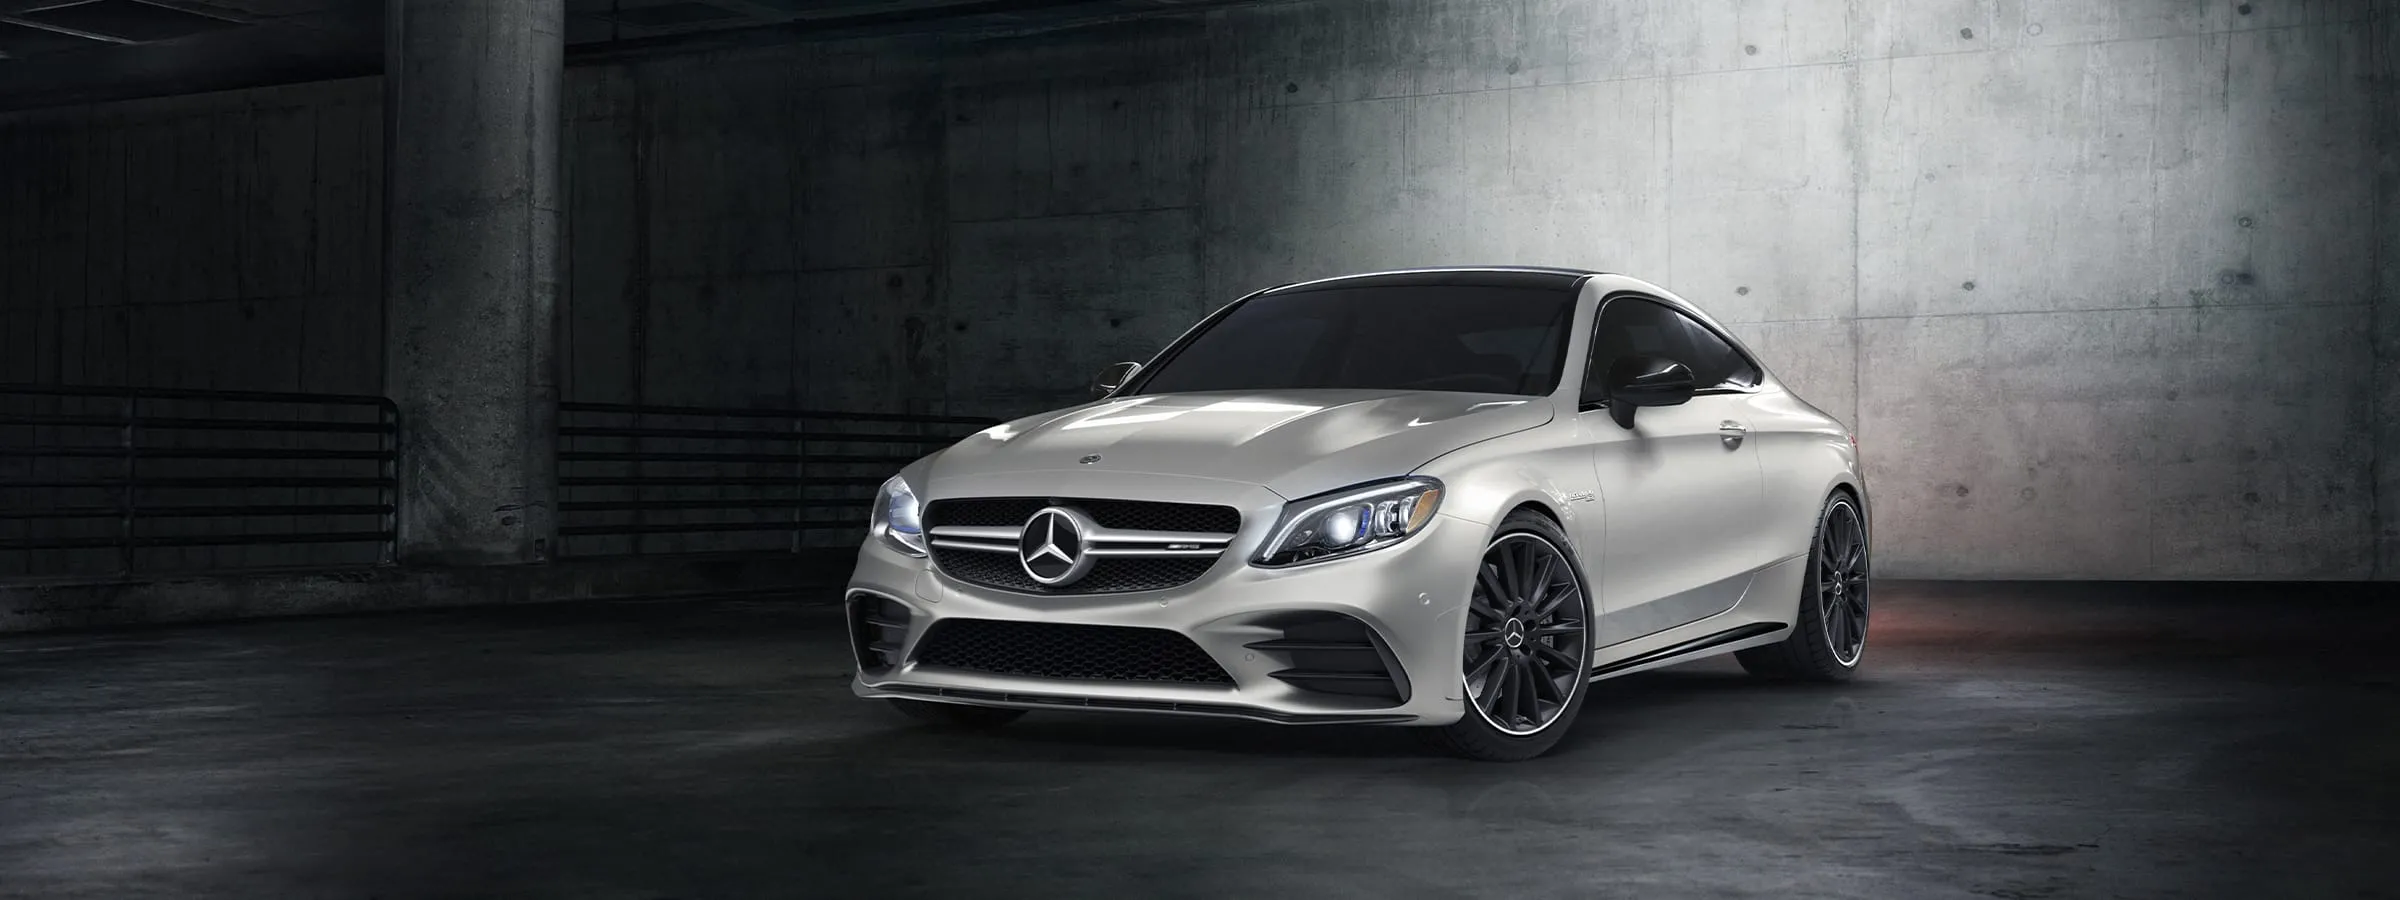 https://www.mbusa.com/content/dam/mb-nafta/us/myco/my23/c/coupe/class-page/amg/2023-AMG-C-COUPE-HERO-DR.jpg